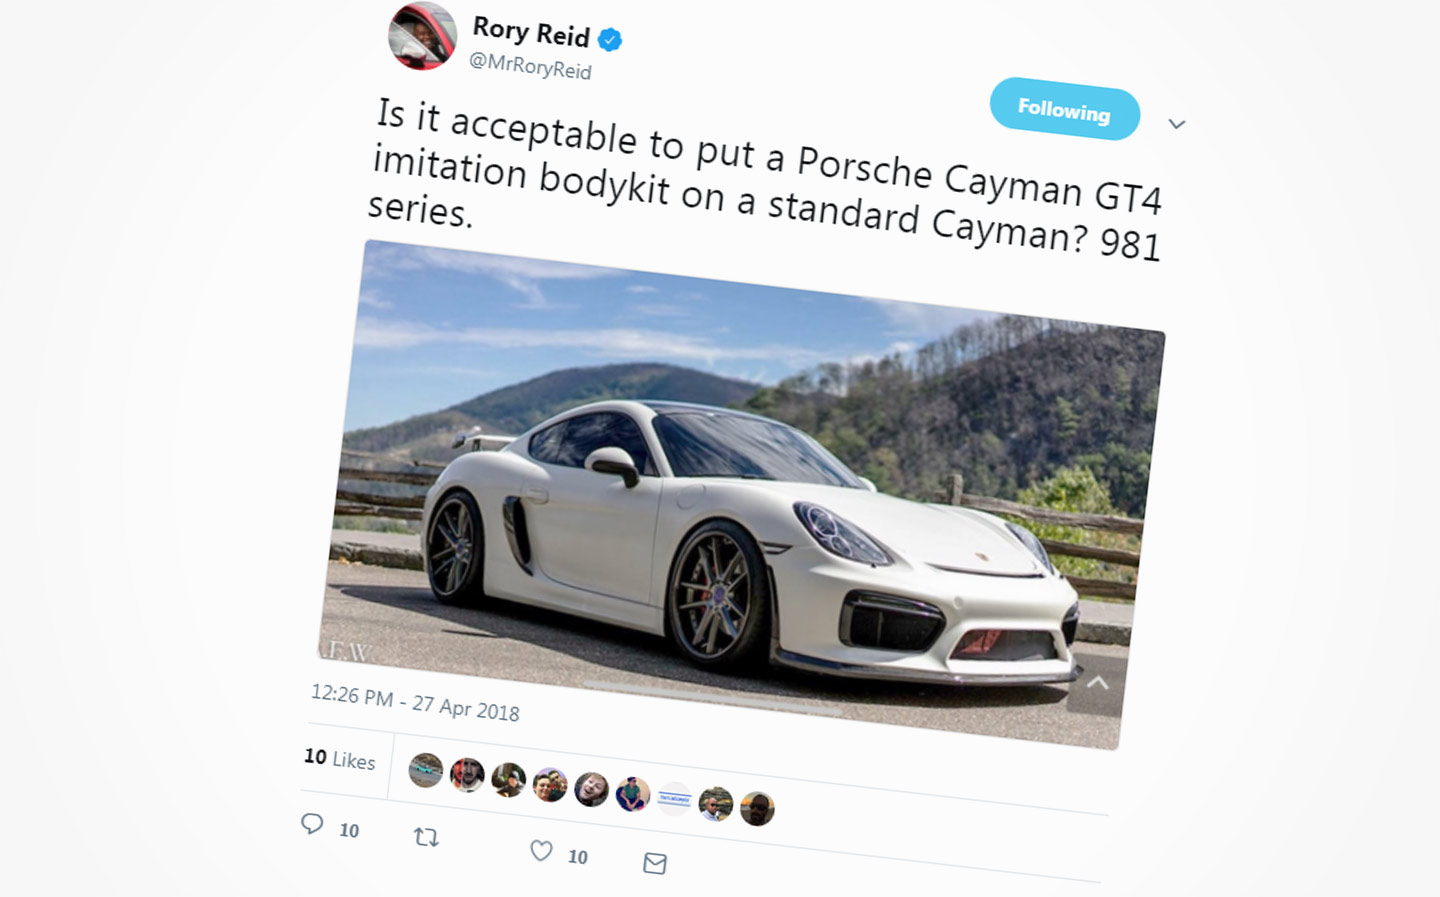 Top Gear presenter Rory Reid just horrified car purists with this question